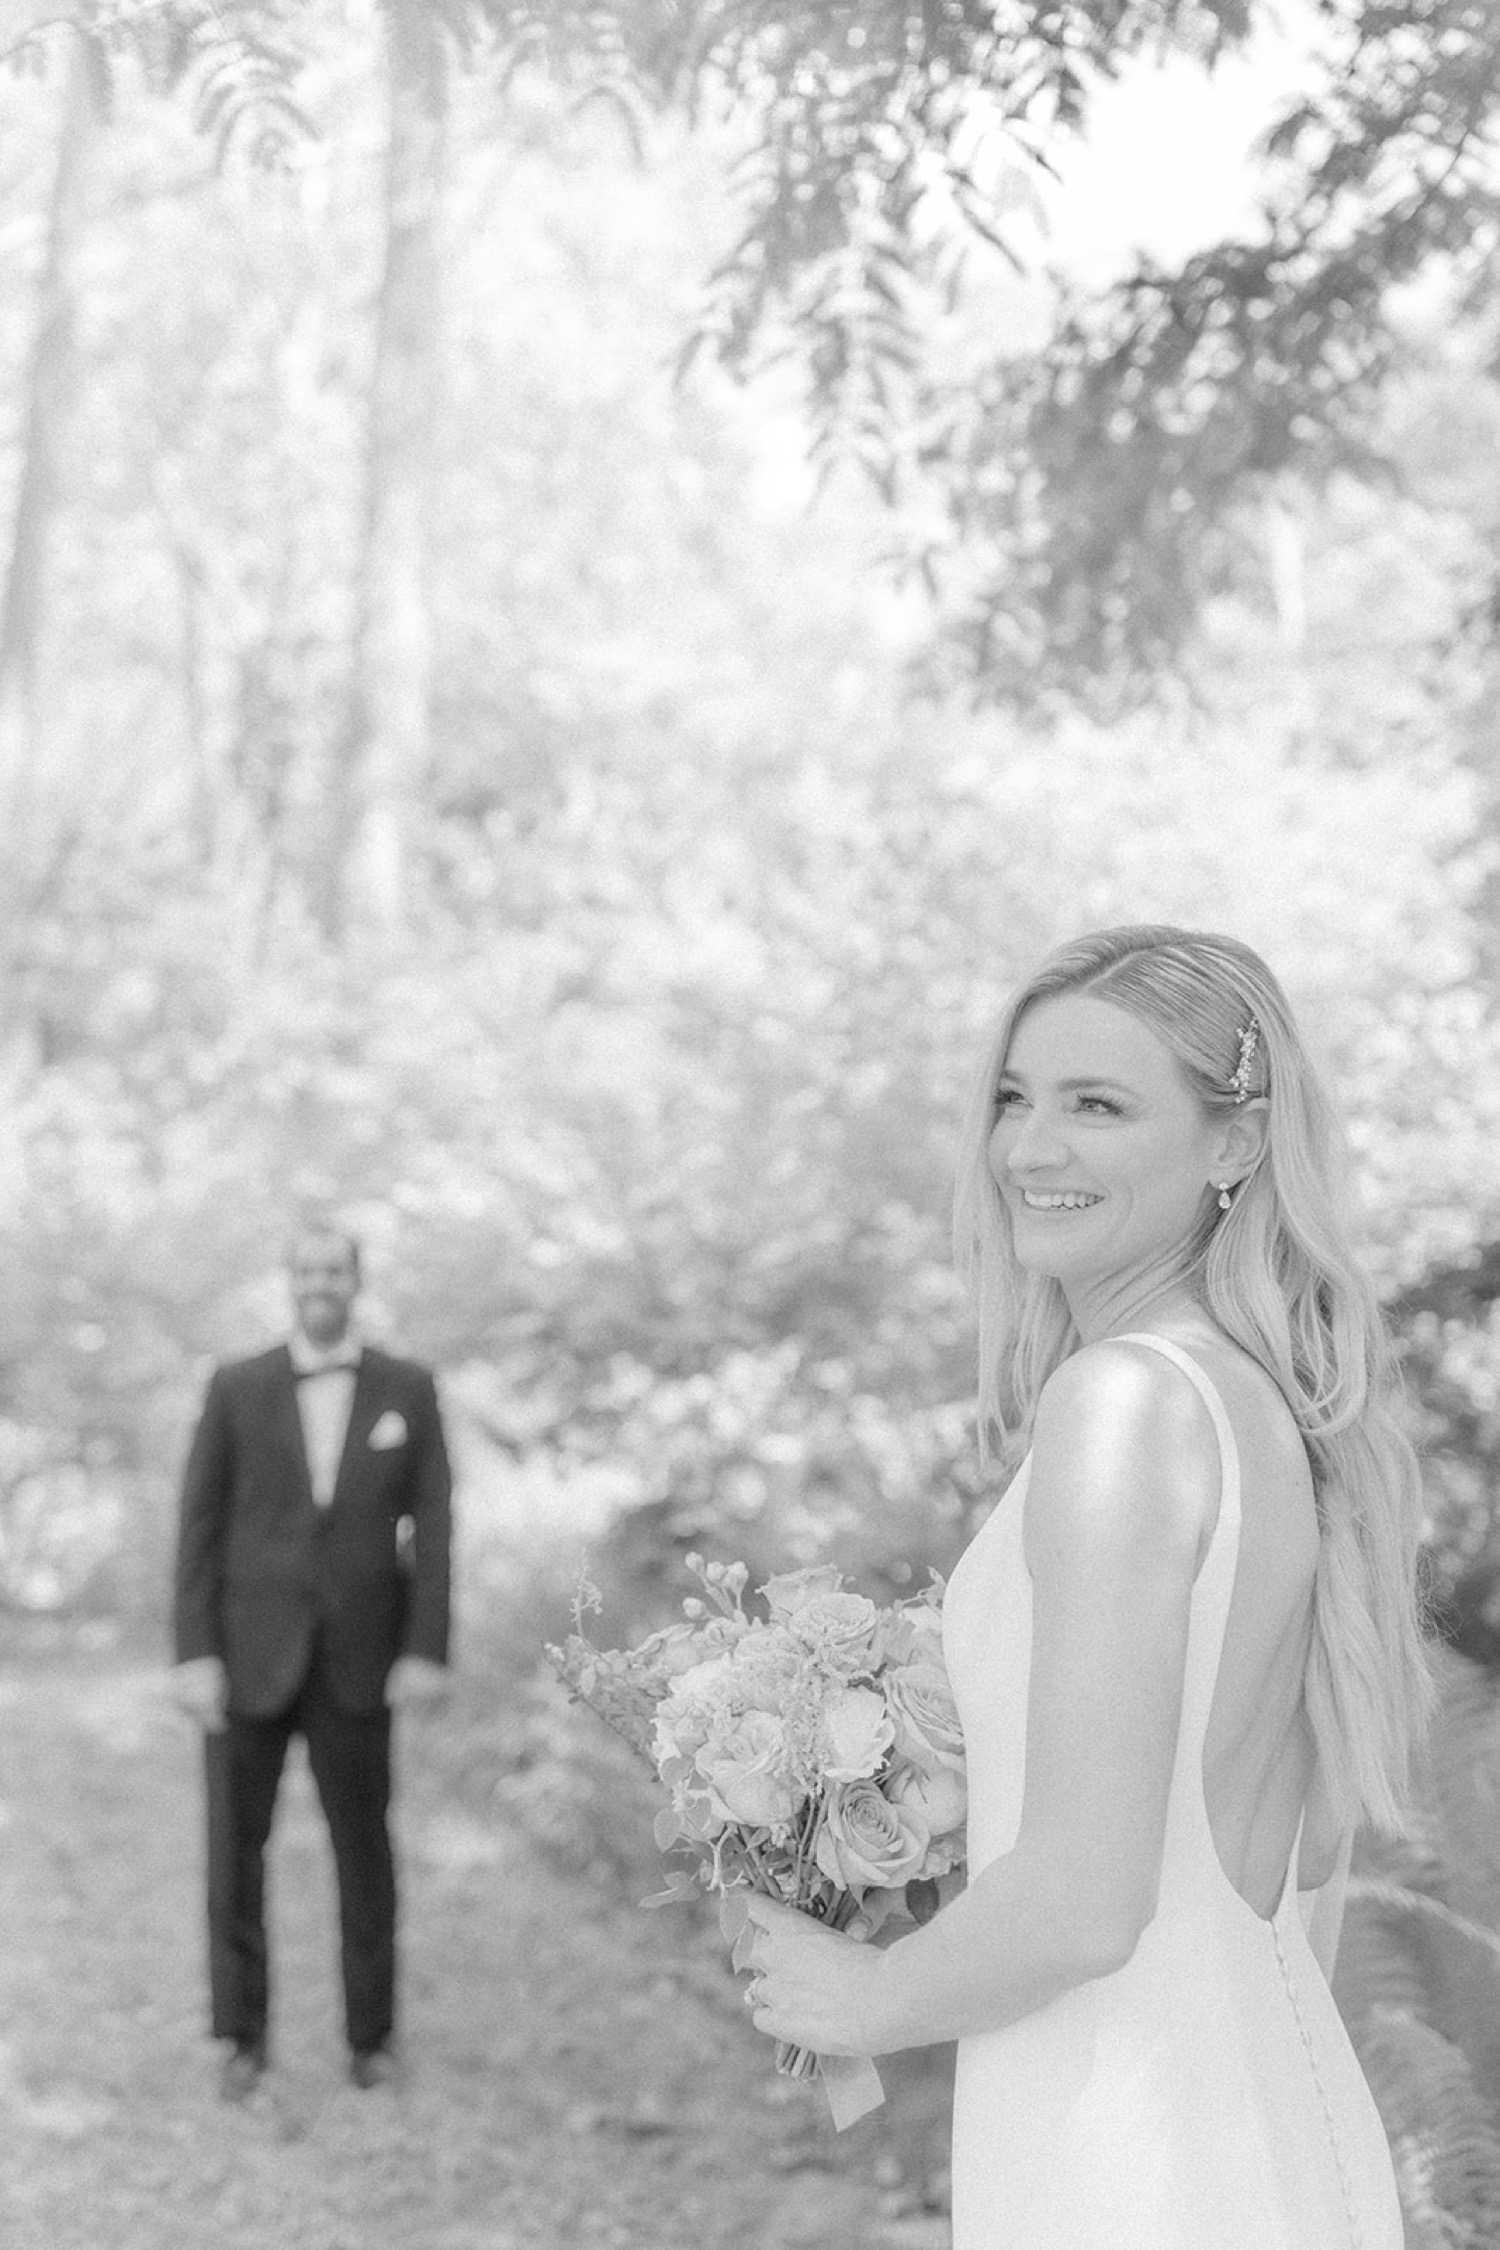 blurry out of focus bride holding flowers groom behind